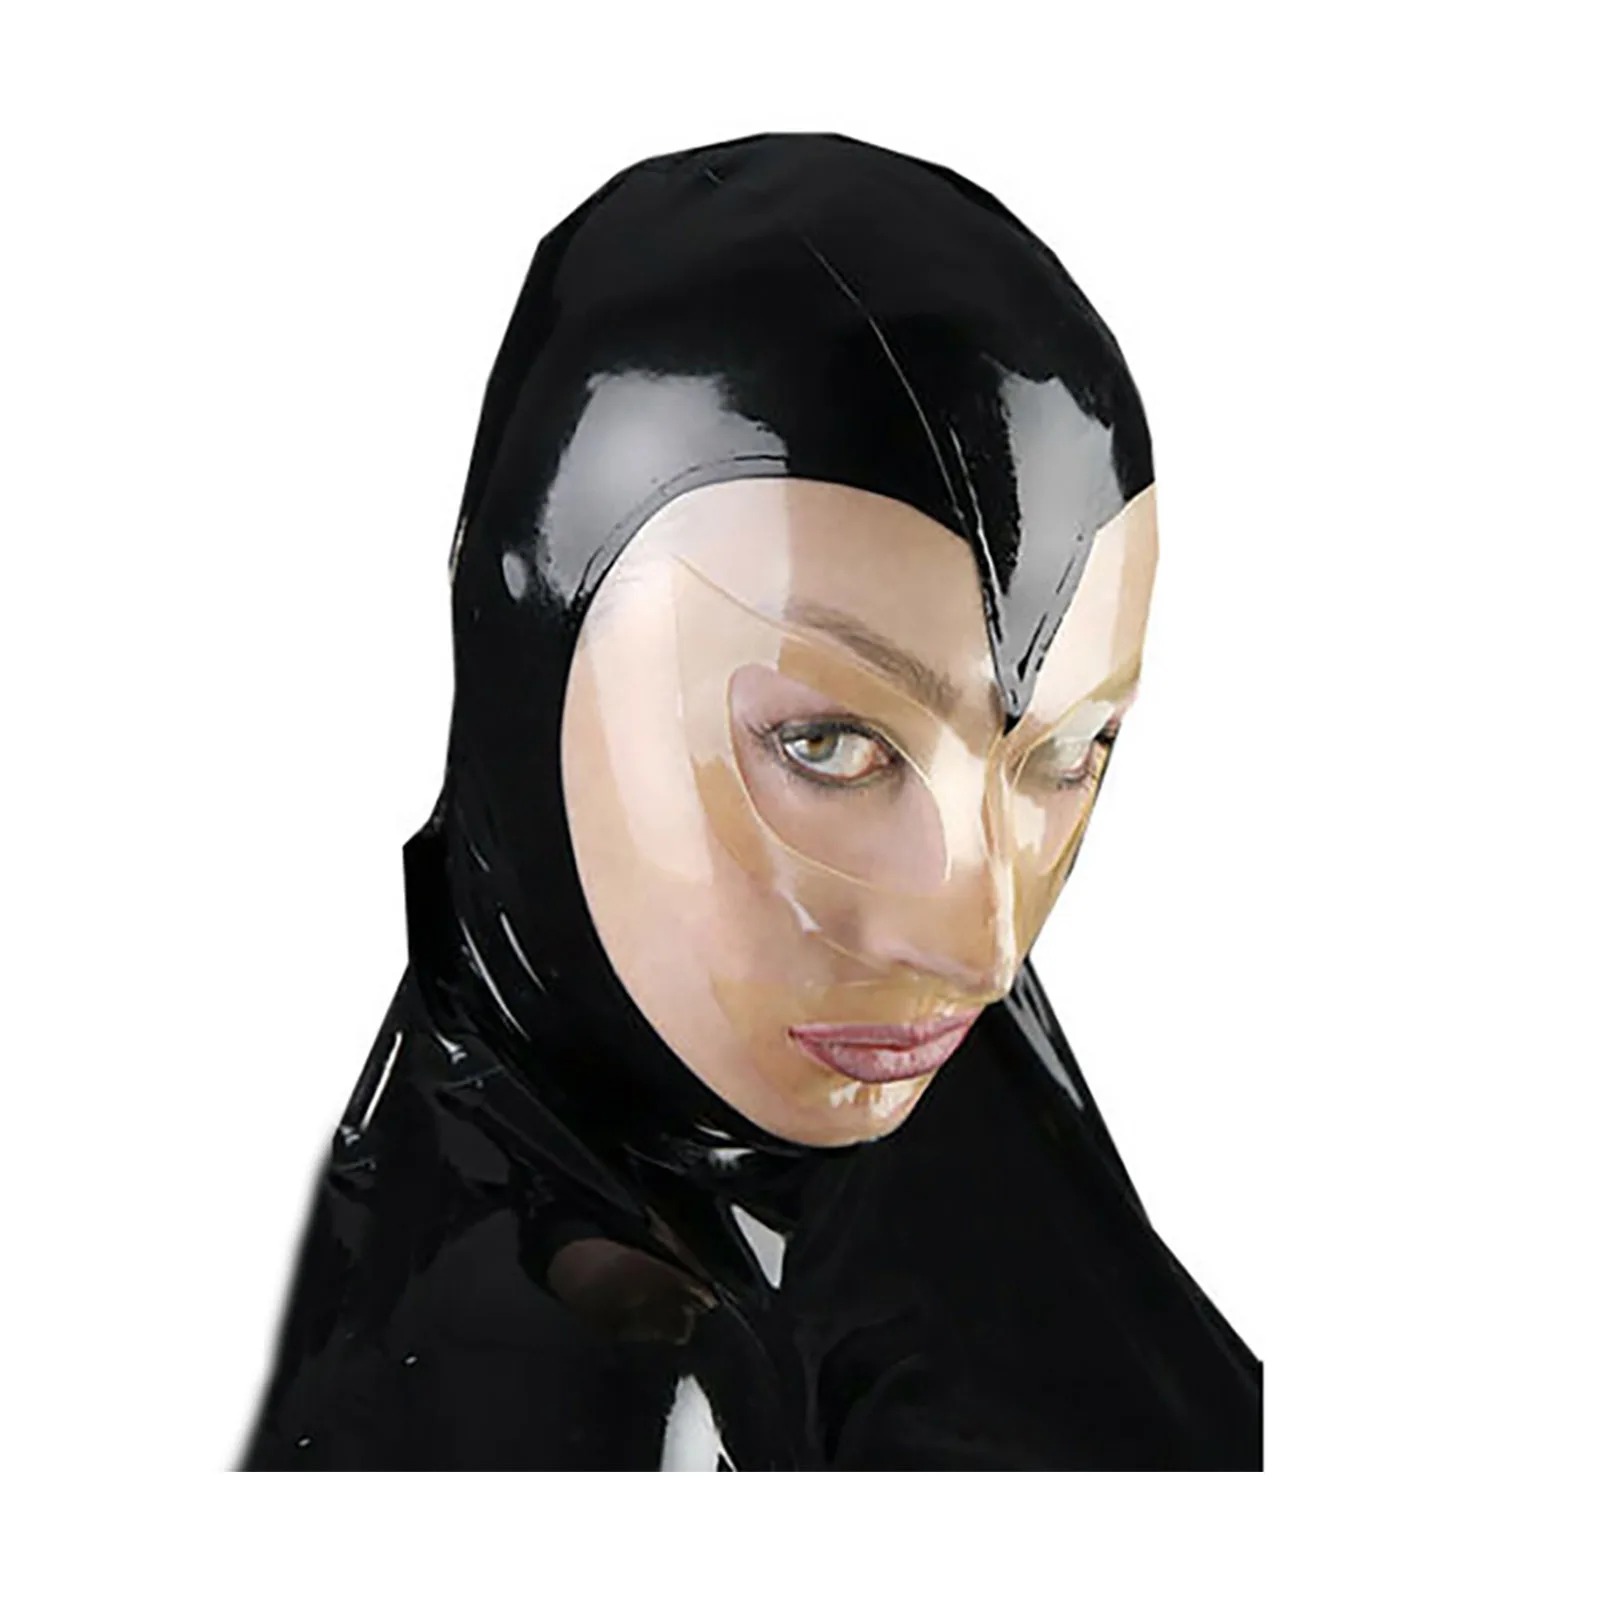 MONNIK Latex Mask Rubber Fashion Hood Two Color Open Eyes&Mouth with Rear Zipper Handmade for Unisex Bodysuit Cosplay Party monnik latex mask unisex rubber hood open mouth